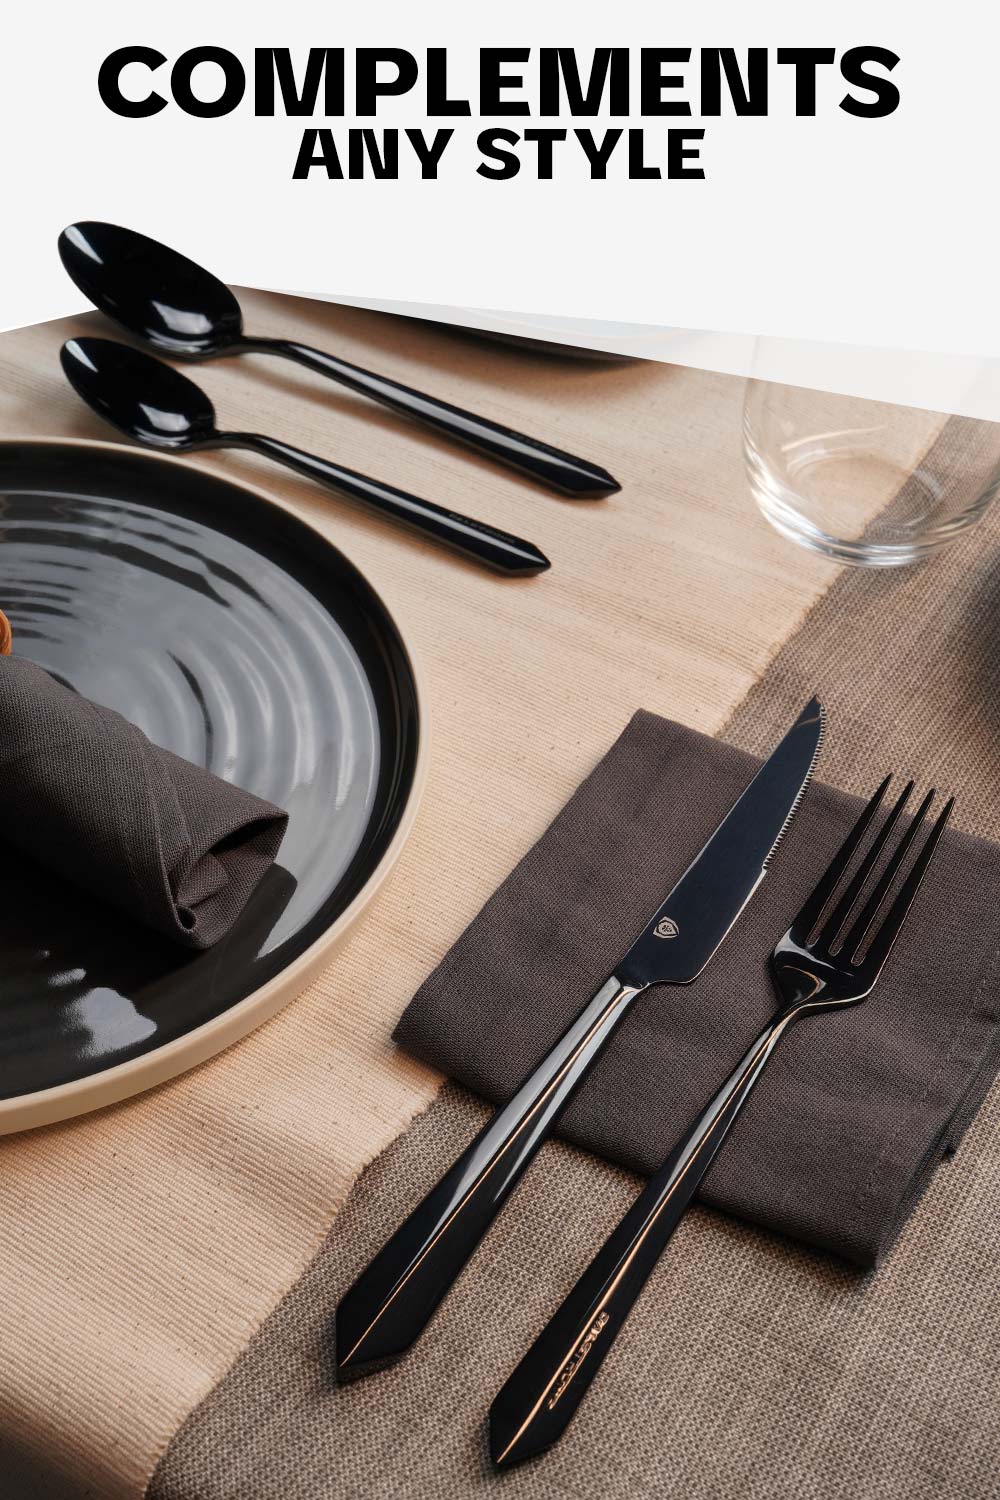 Dalstrong 20 piece flatware cutlery set black stainless steel service of 4 on a table with a black plate.